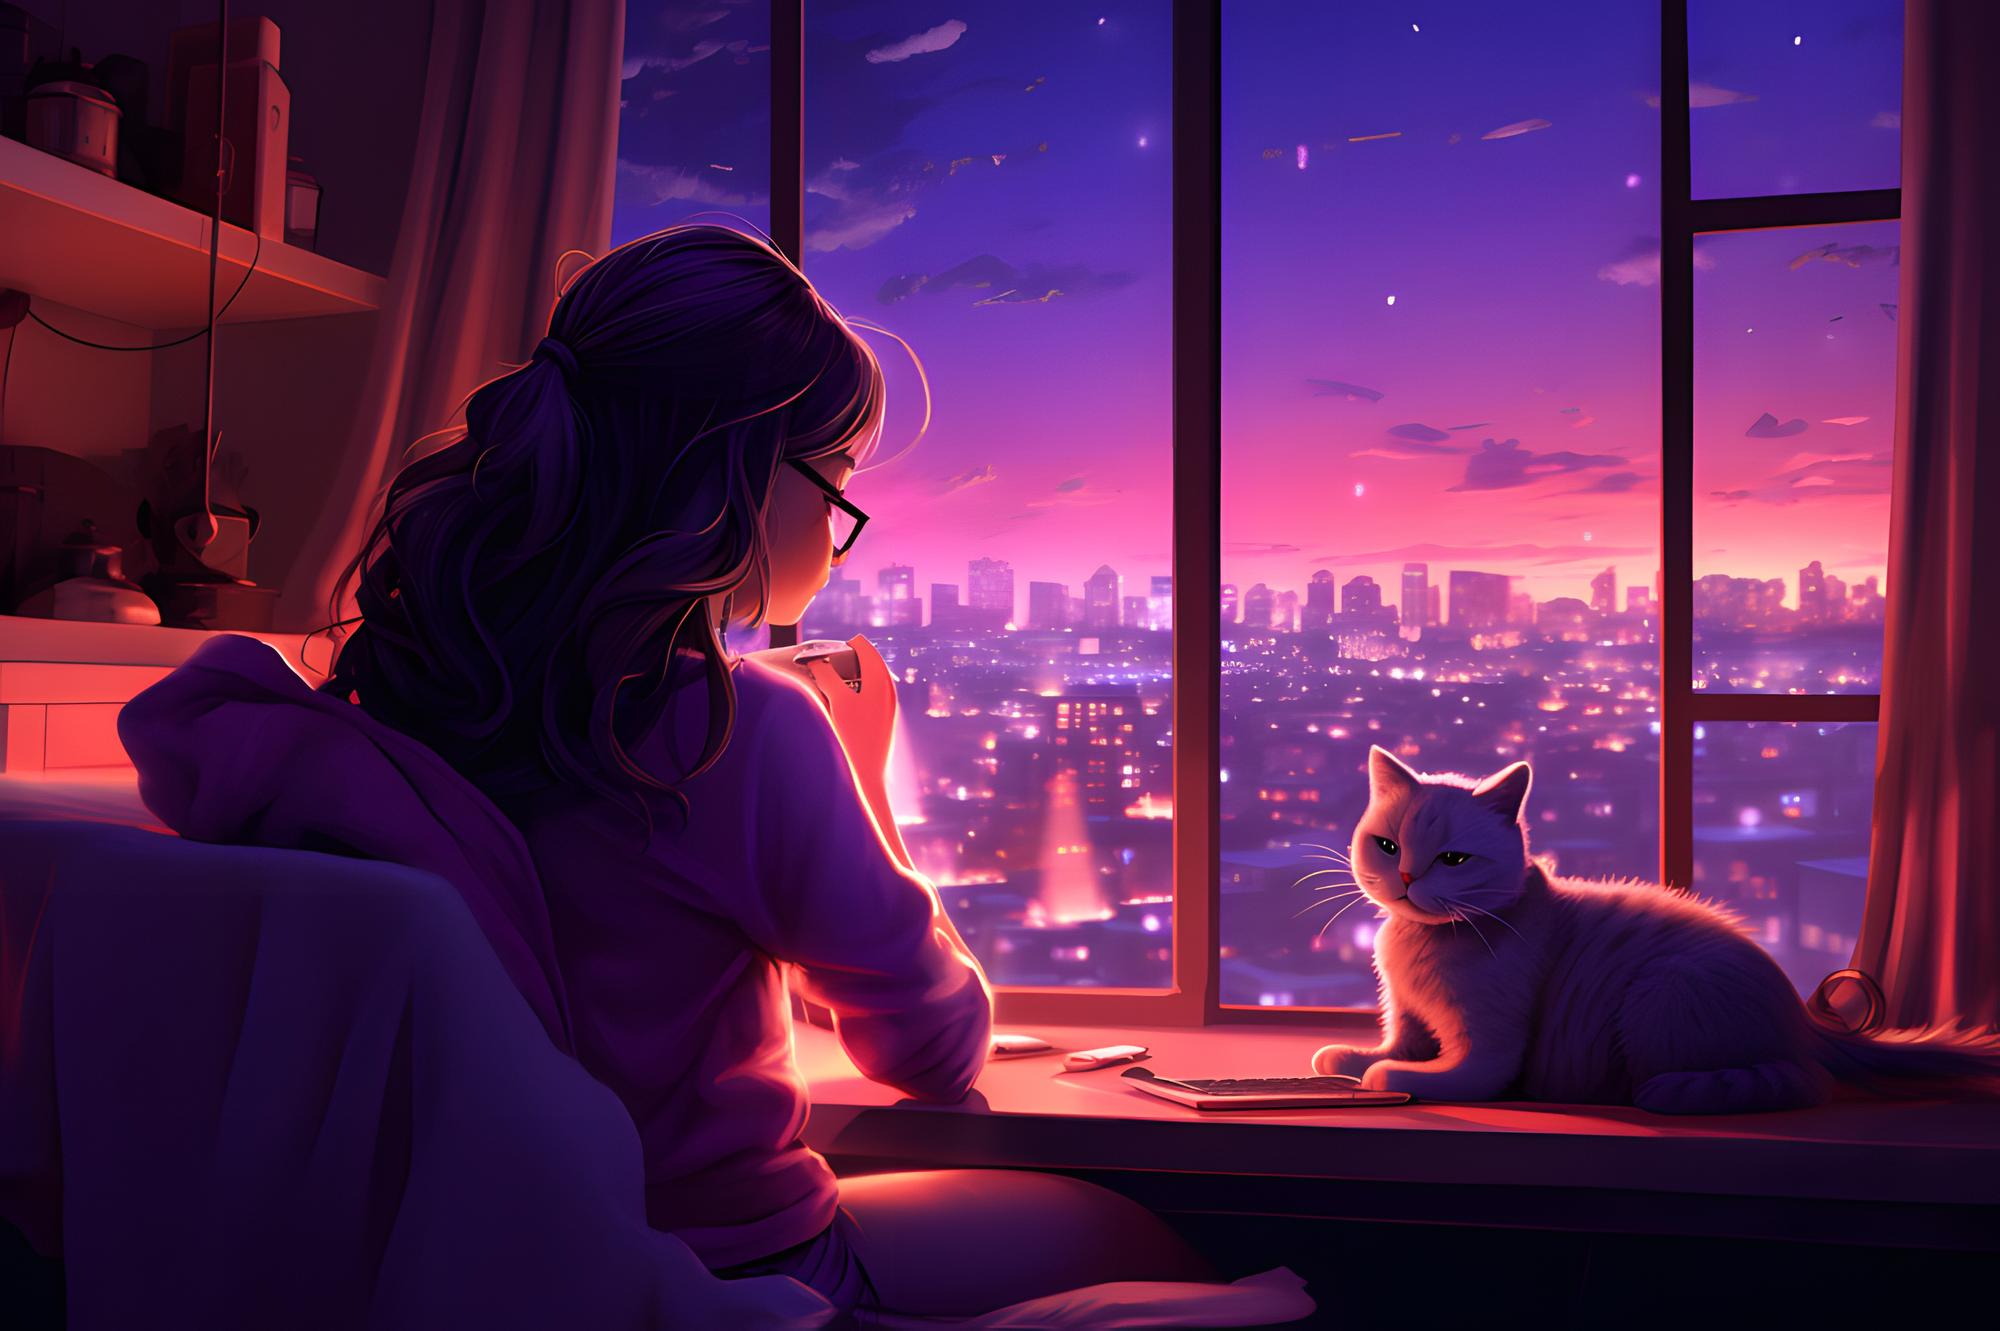 PC Wallpaper 4K - Anime Serenity: A Chill Vibe with Feline Companions!